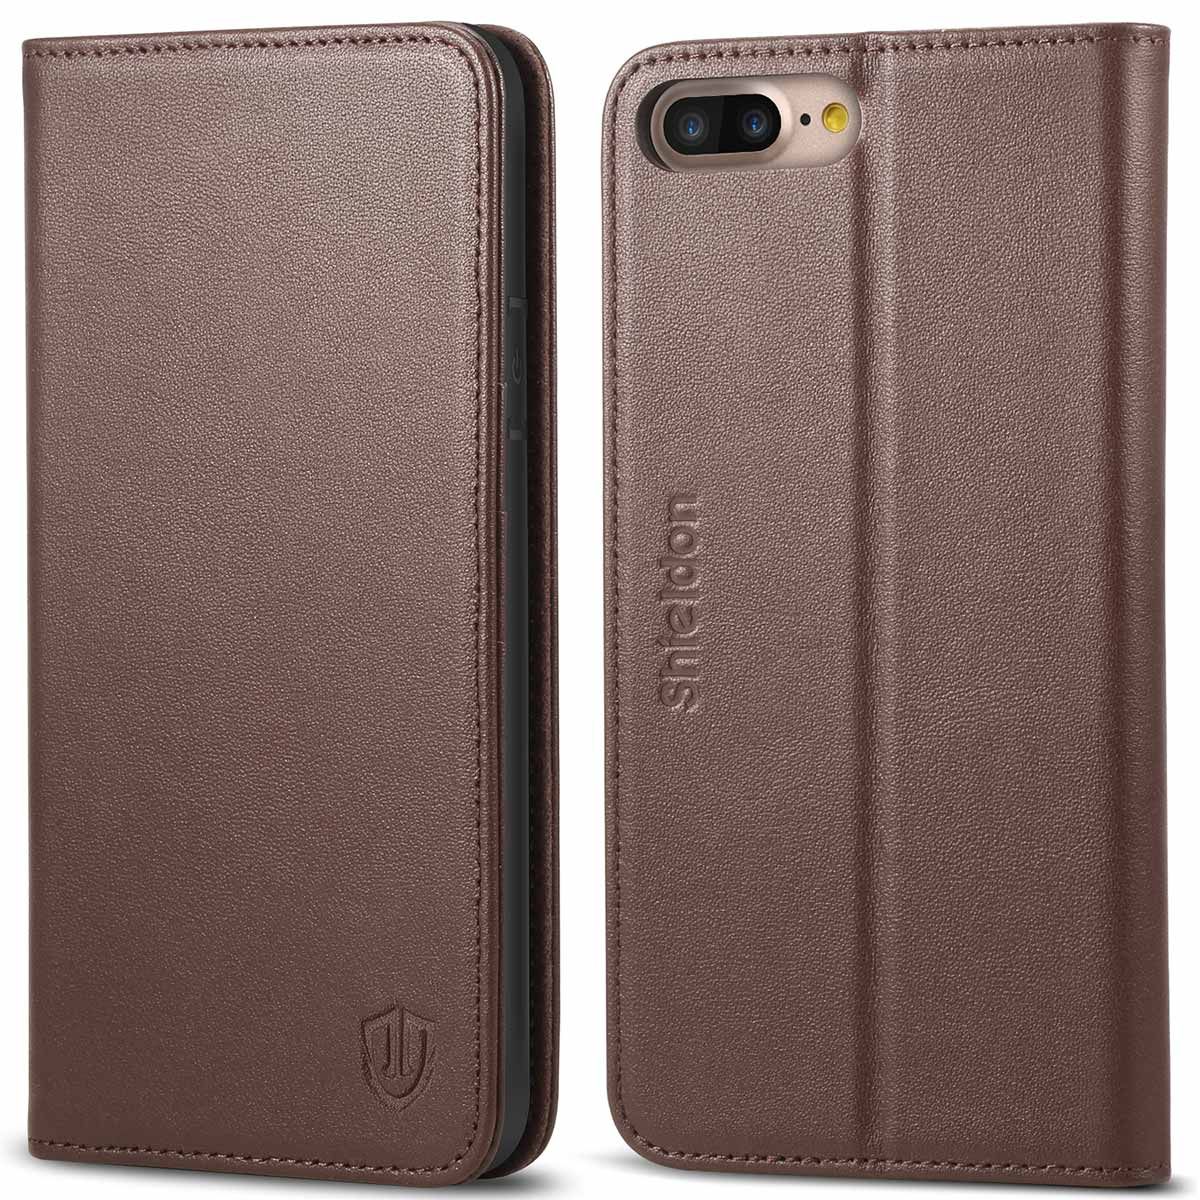 SHIELDON iPhone 8 Plus Wallet Case - Coffee color Genuine Leather Cover, Magnet Closure, Kickstand Function, Flip Folio Style